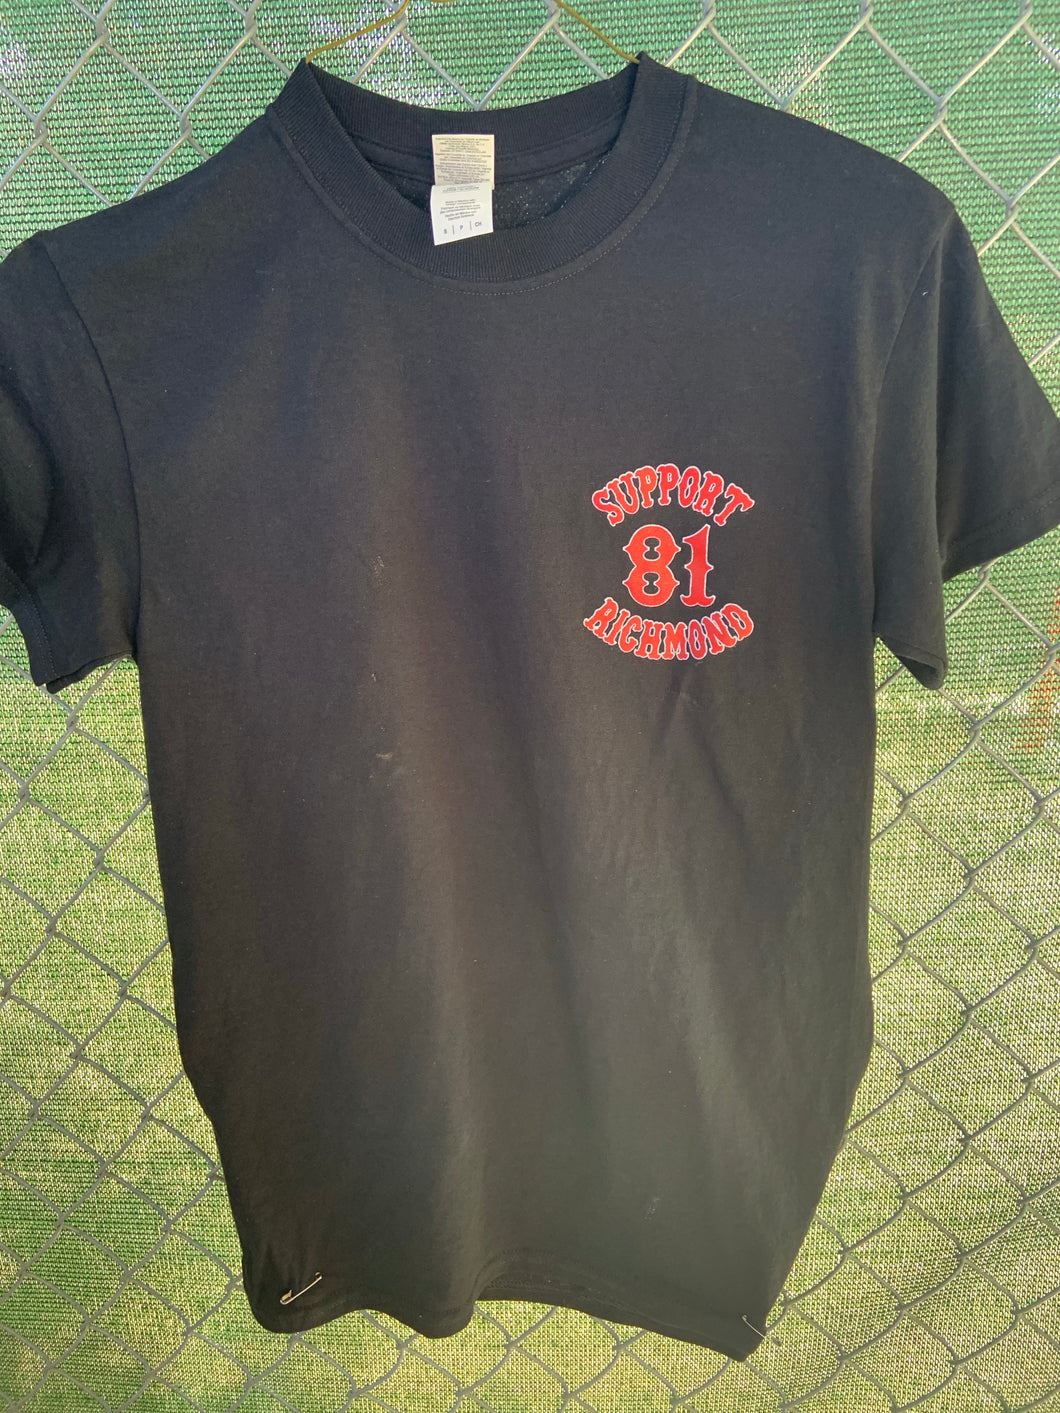 Black t shirt with red support 81 patch